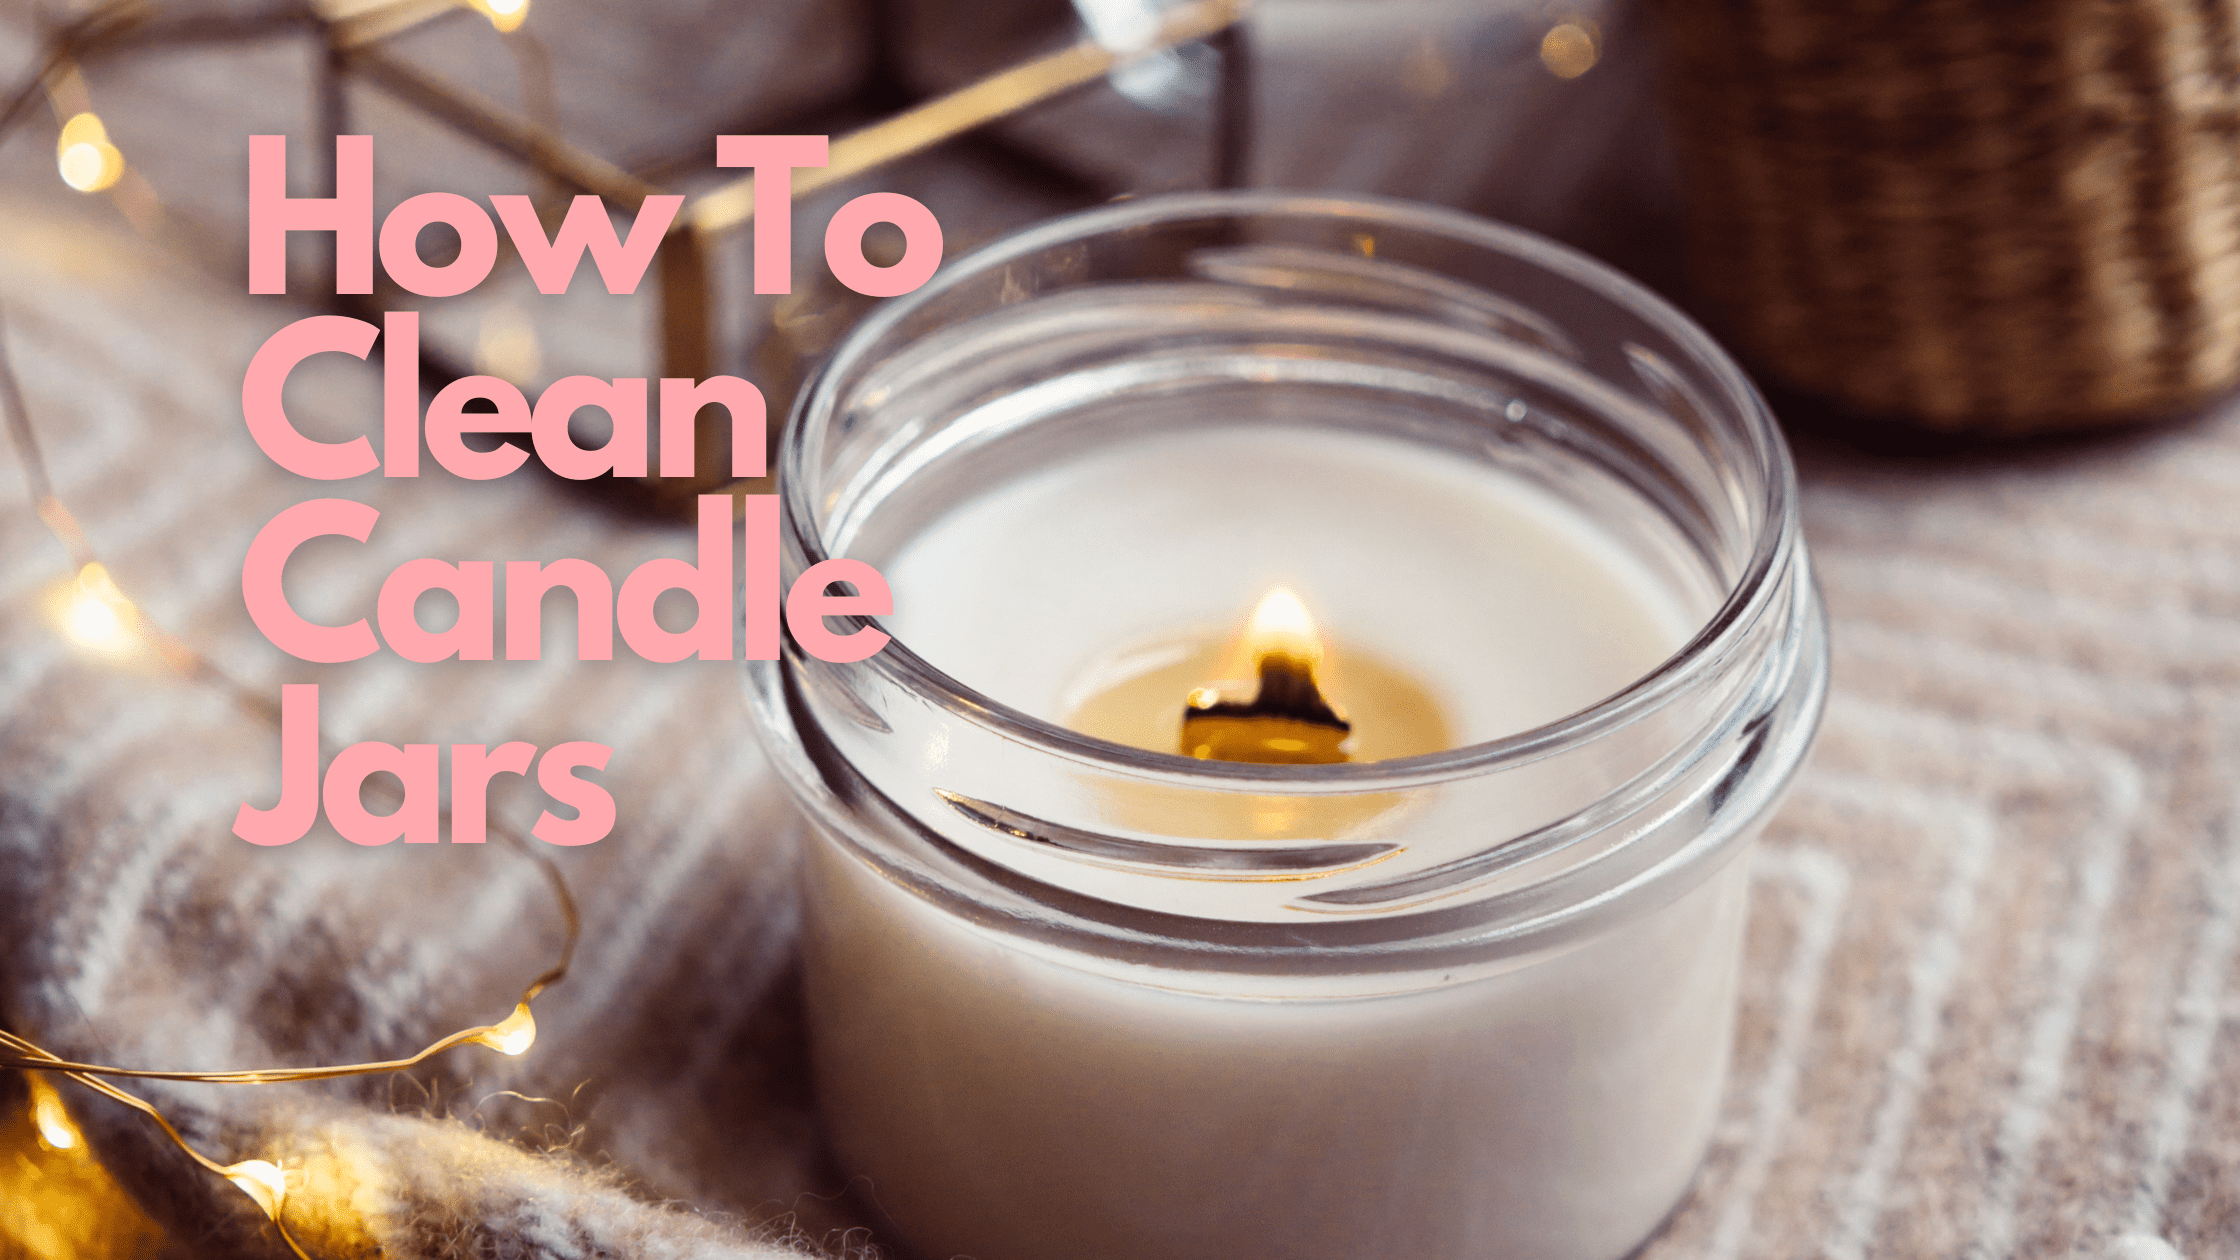 How to Get Wax Out of a Candle Jar 4 Ways (That Actually Work)